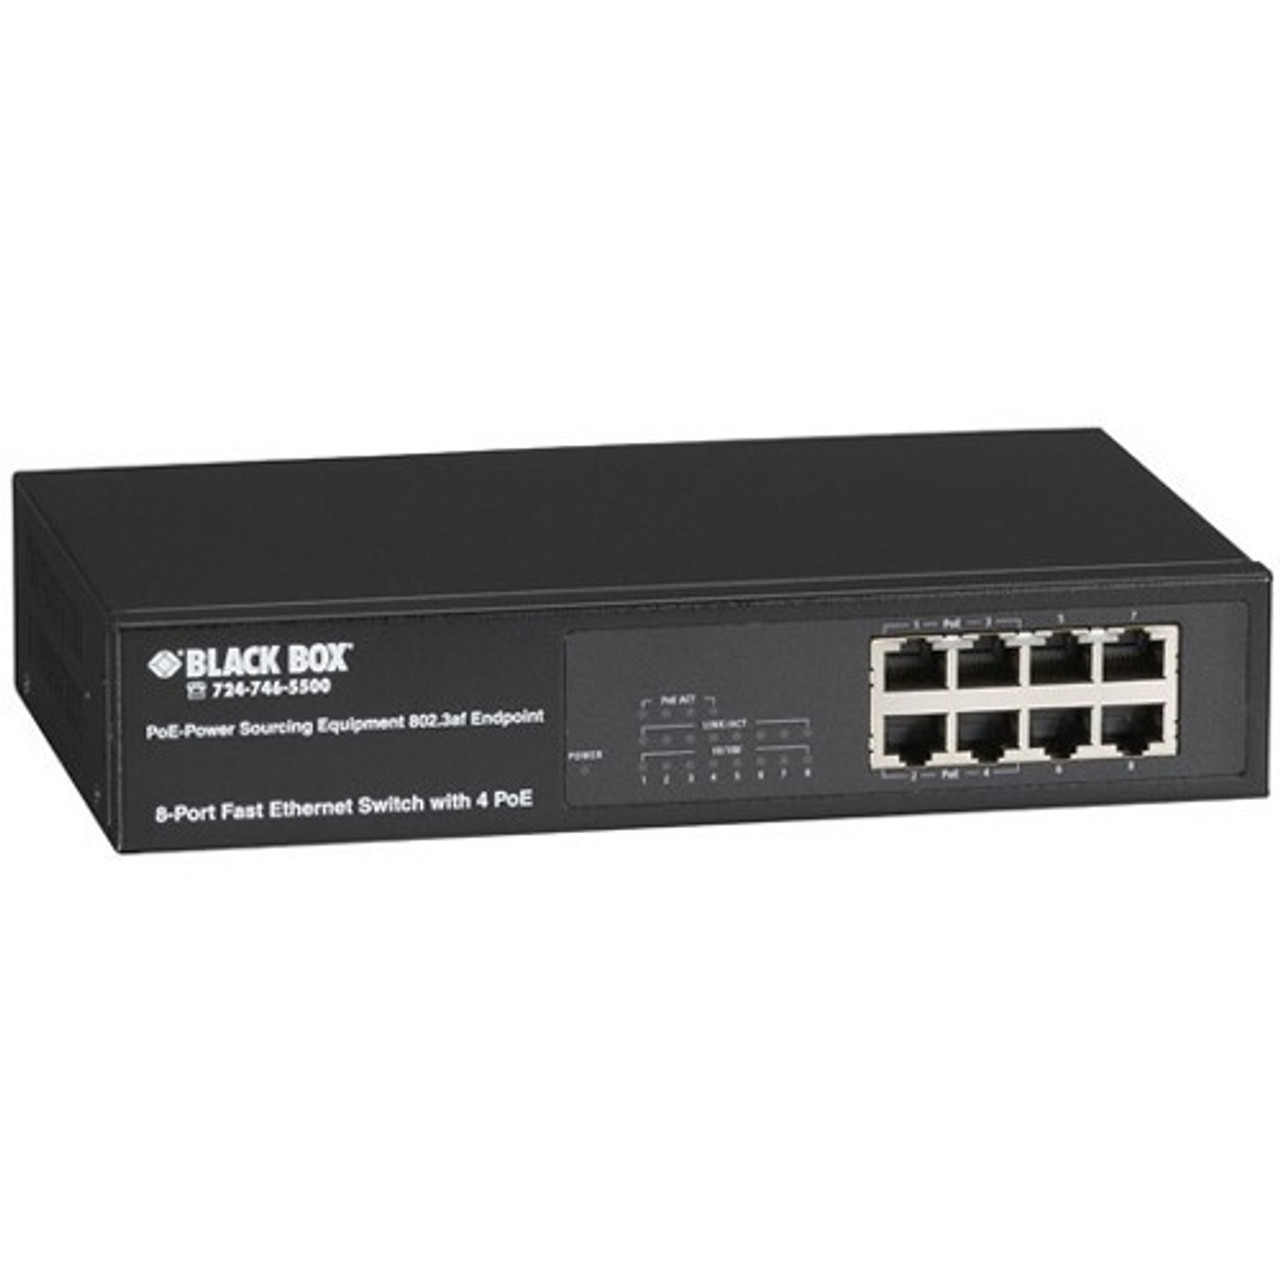 LPB208A Black Box 8-Ports Unmanaged 10/100 Fast Ethernet Switch with 4 PoE Ports (Refurbished)